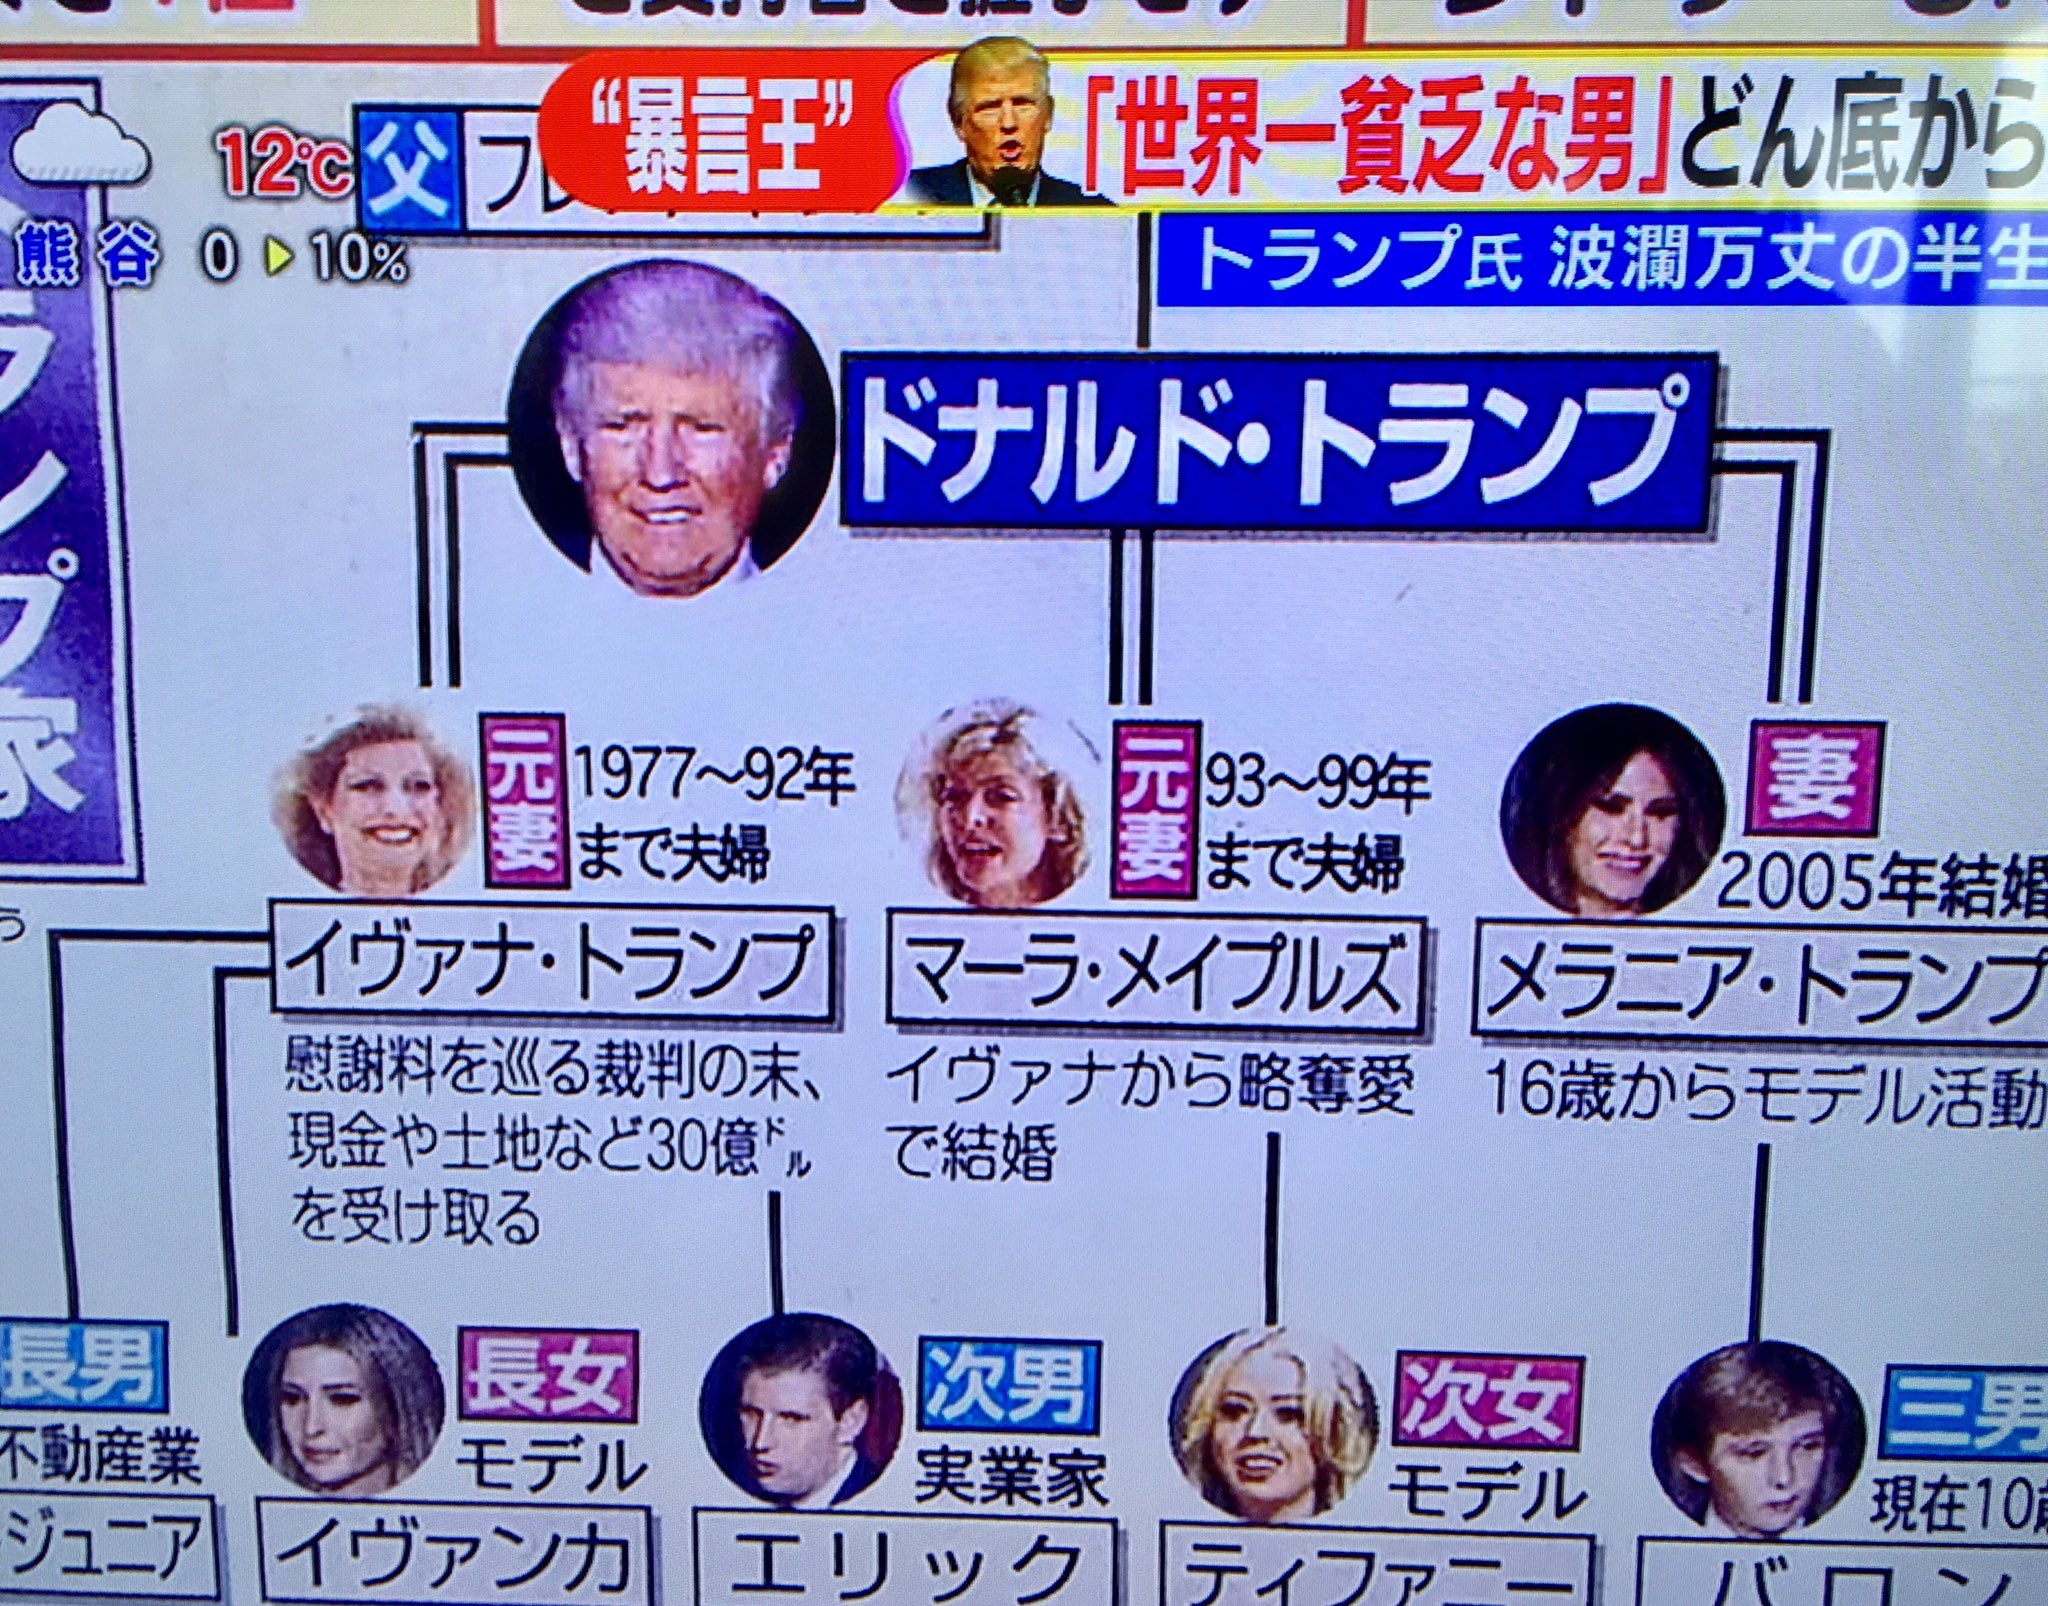 Melanie Brock Japanese Morning Tv Shows Are Keeping Us Informed Programme Panelists Fascinated With Trump S Marital History 3 Times Married バツ3 T Co Al7u8vyye9 Twitter